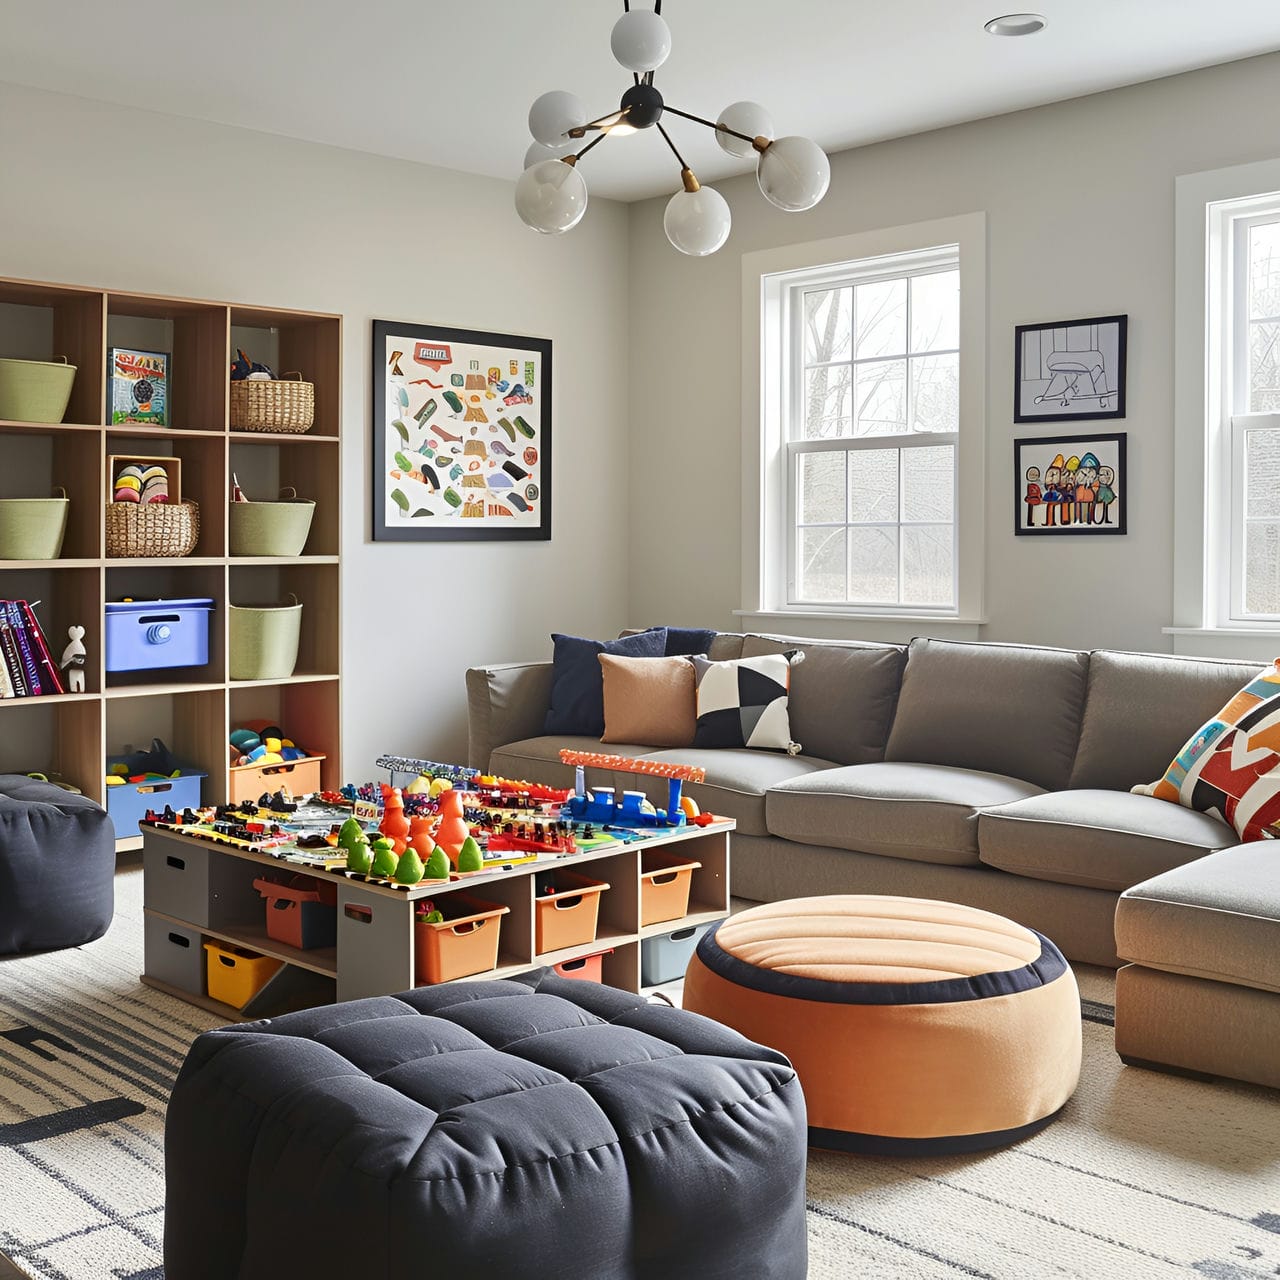 Game room: size, functionality, uses, furniture and renovation